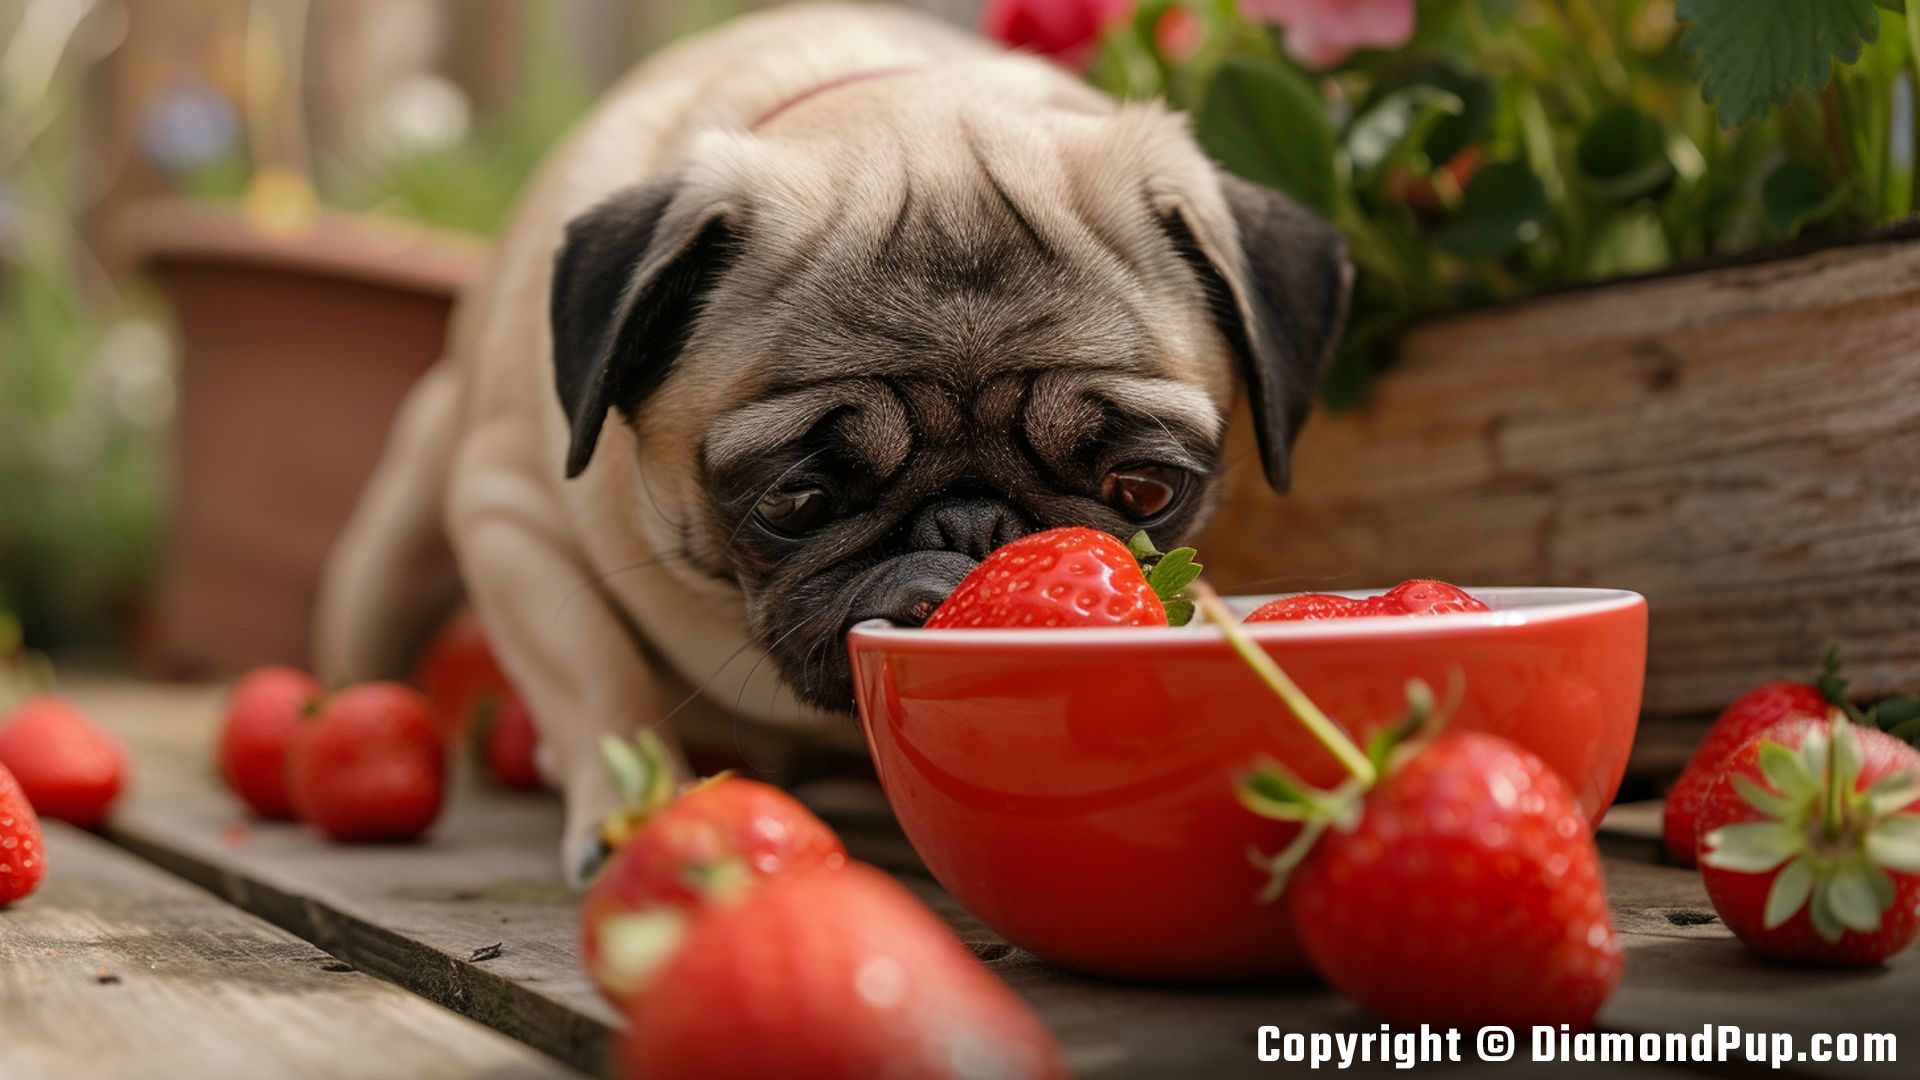 Photograph of a Cute Pug Snacking on Strawberries